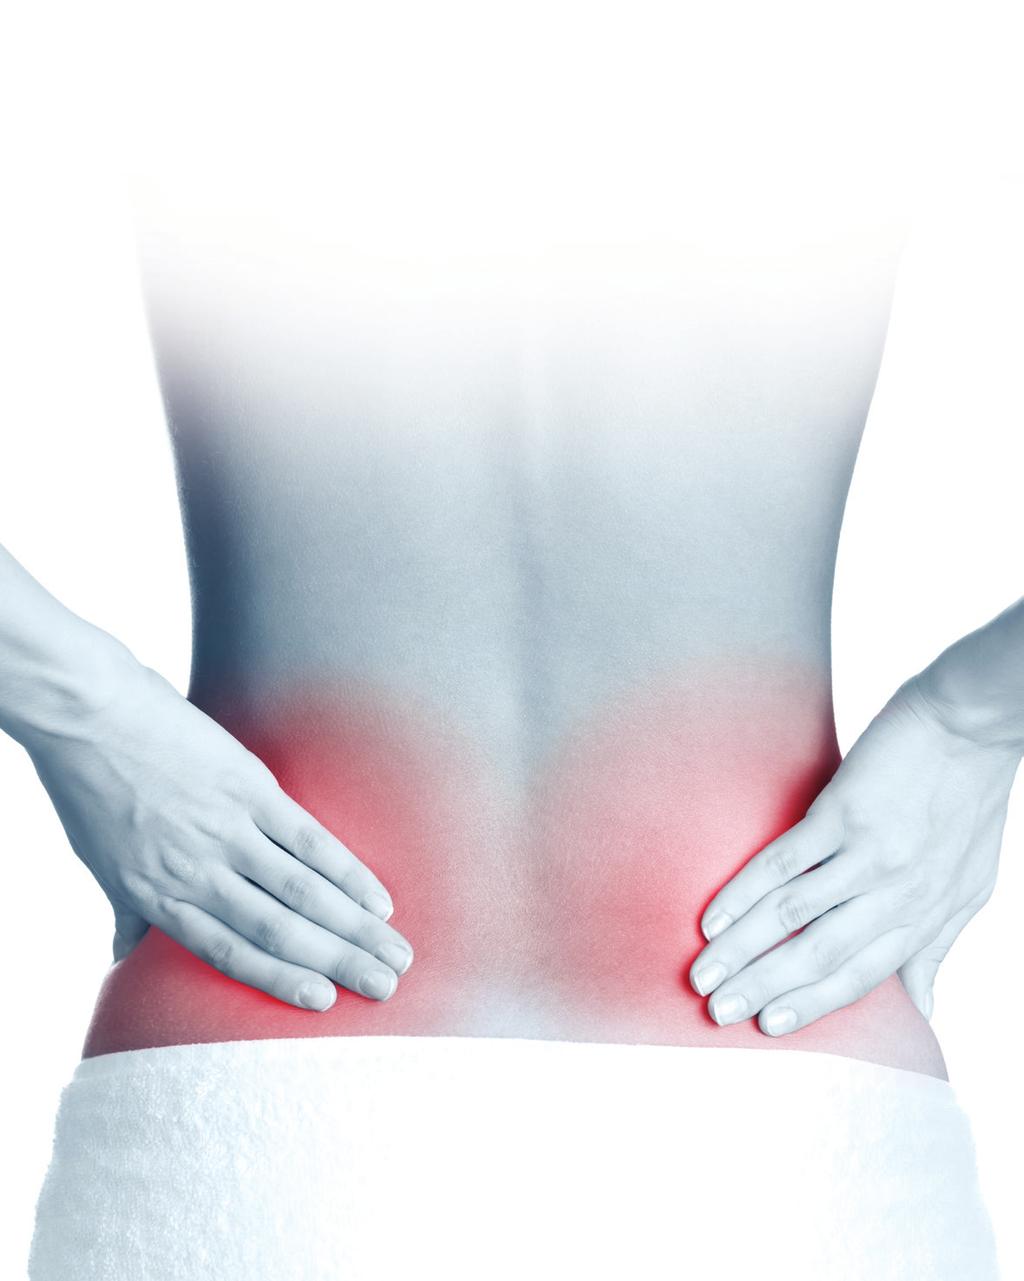 Introduction to the SI Joint 2 Studies show that sacroiliac (SI) joint dysfunction is a challenging condition affecting up to 15-30% of patients with chronic lower back pain (LBP).